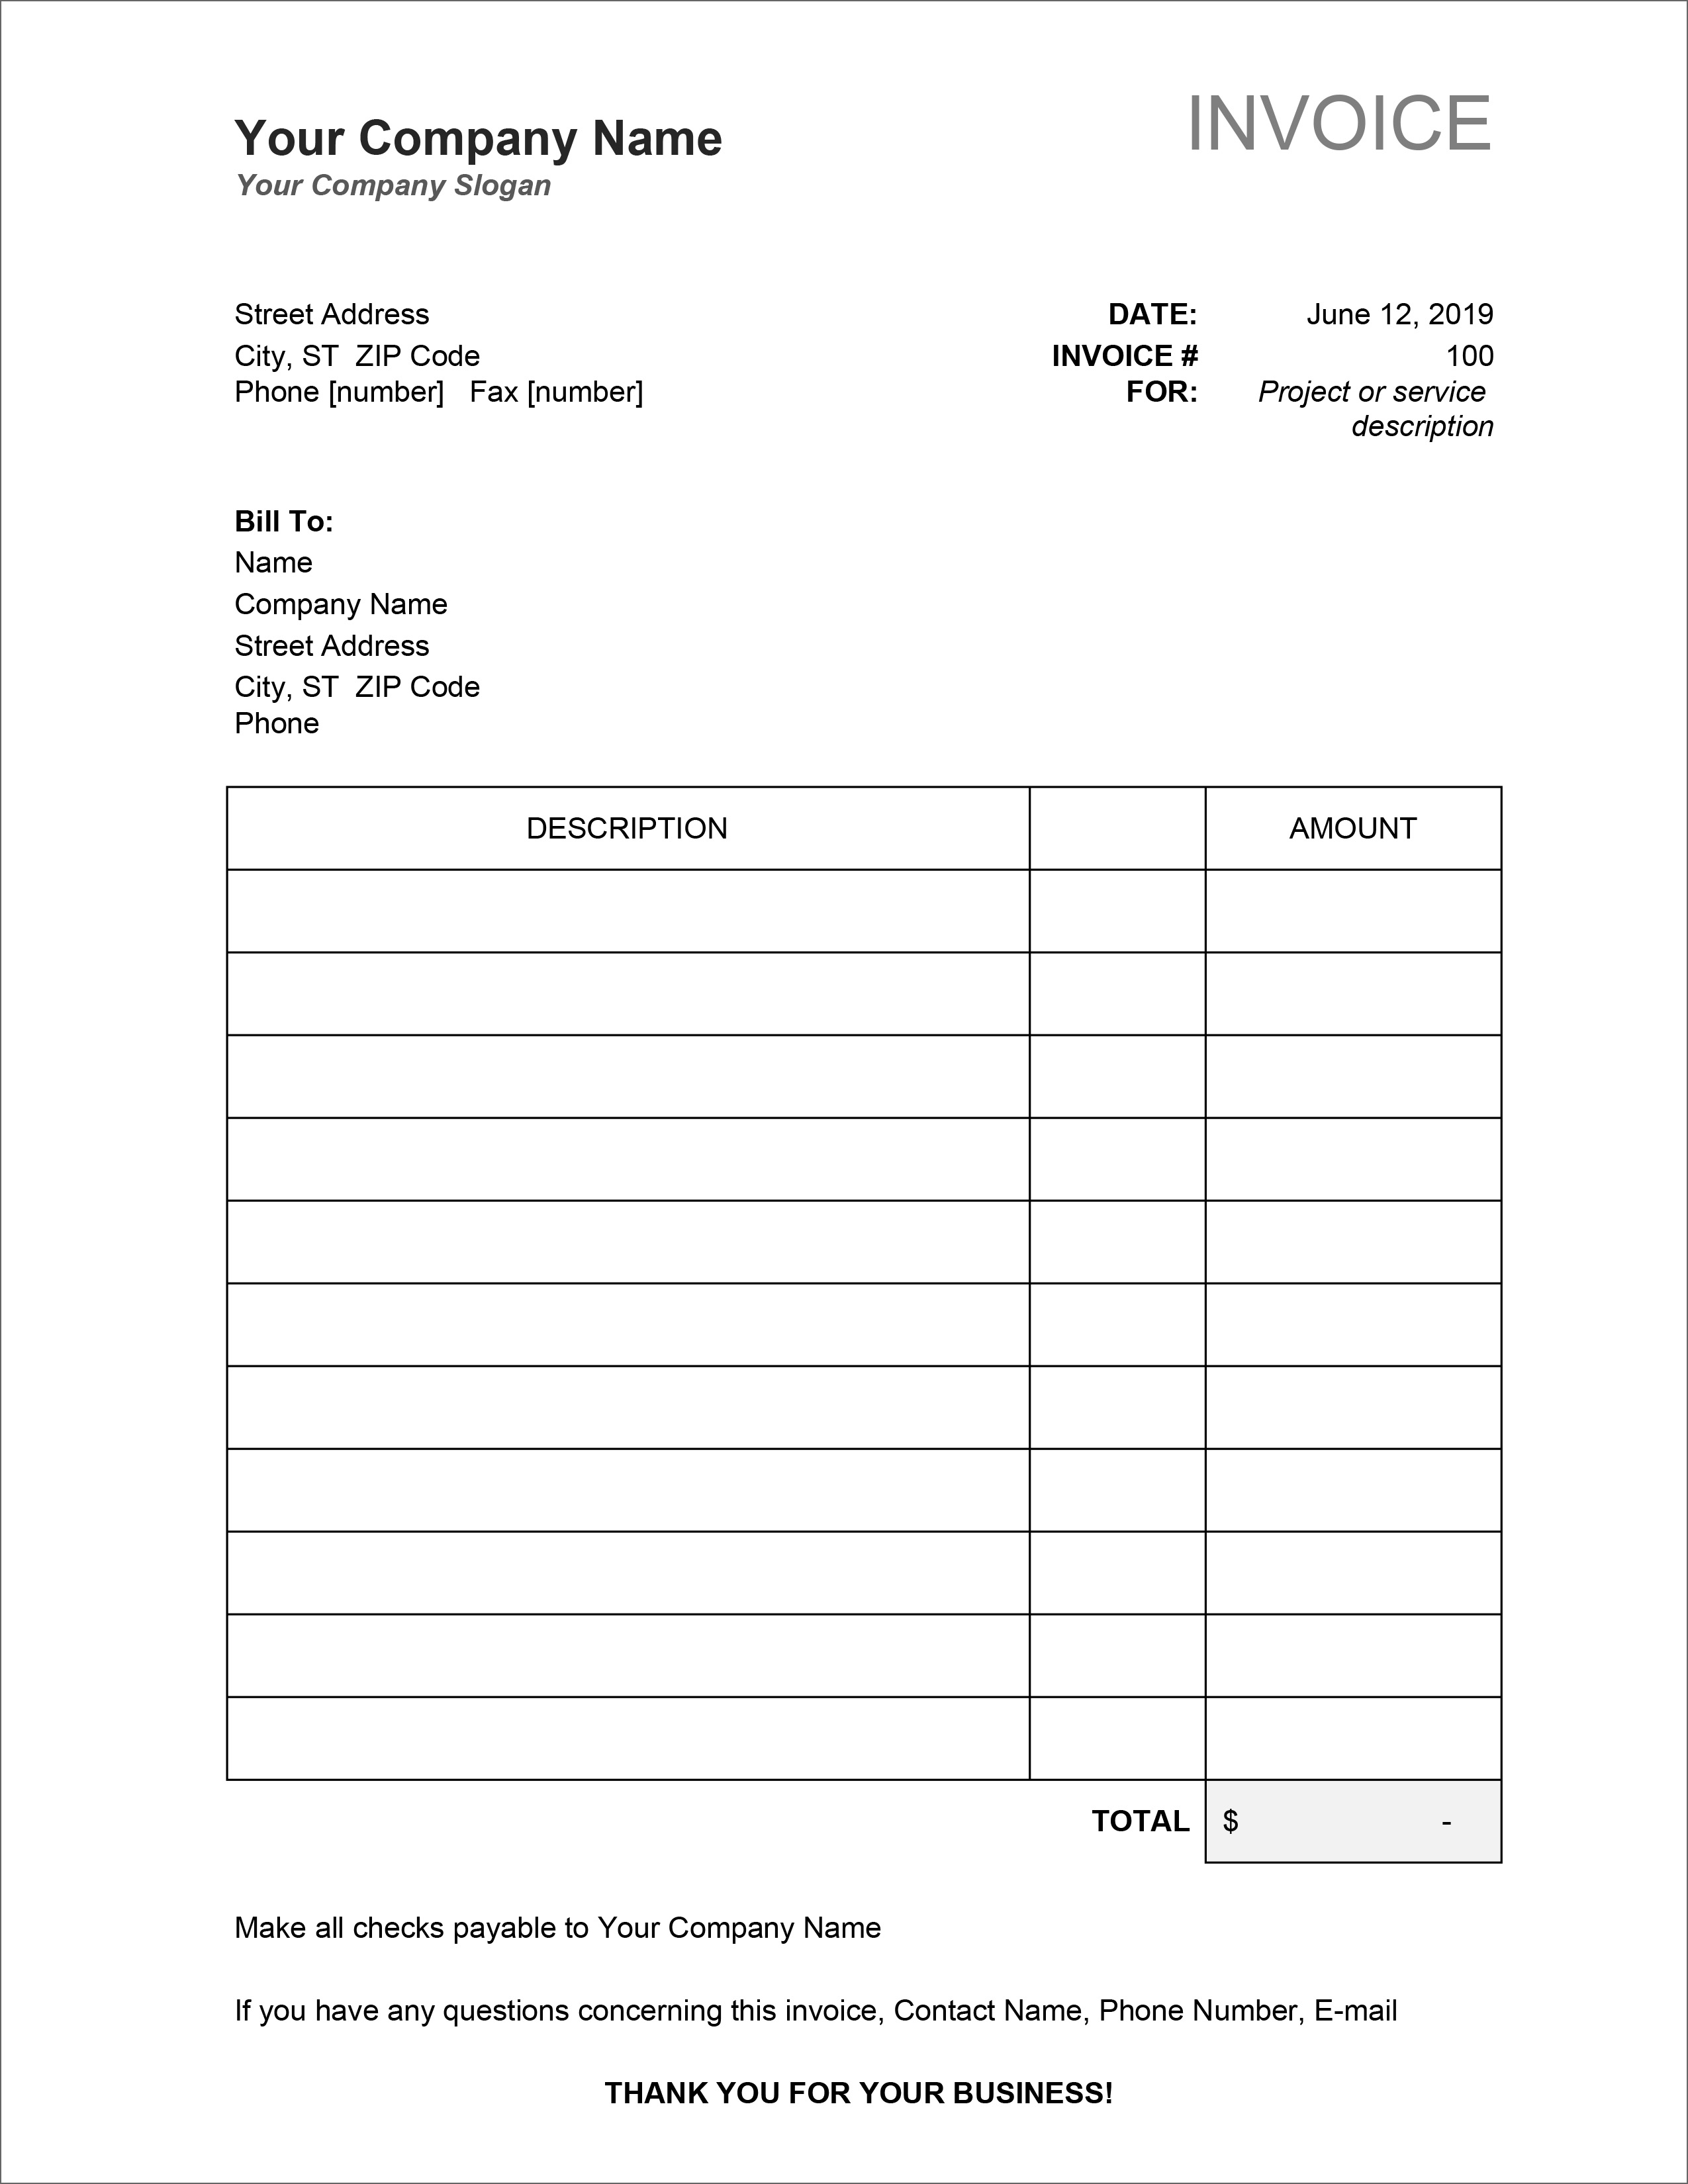 21 Free Invoice Templates In Microsoft Excel And DOCX Formats Throughout Xl Invoice Template